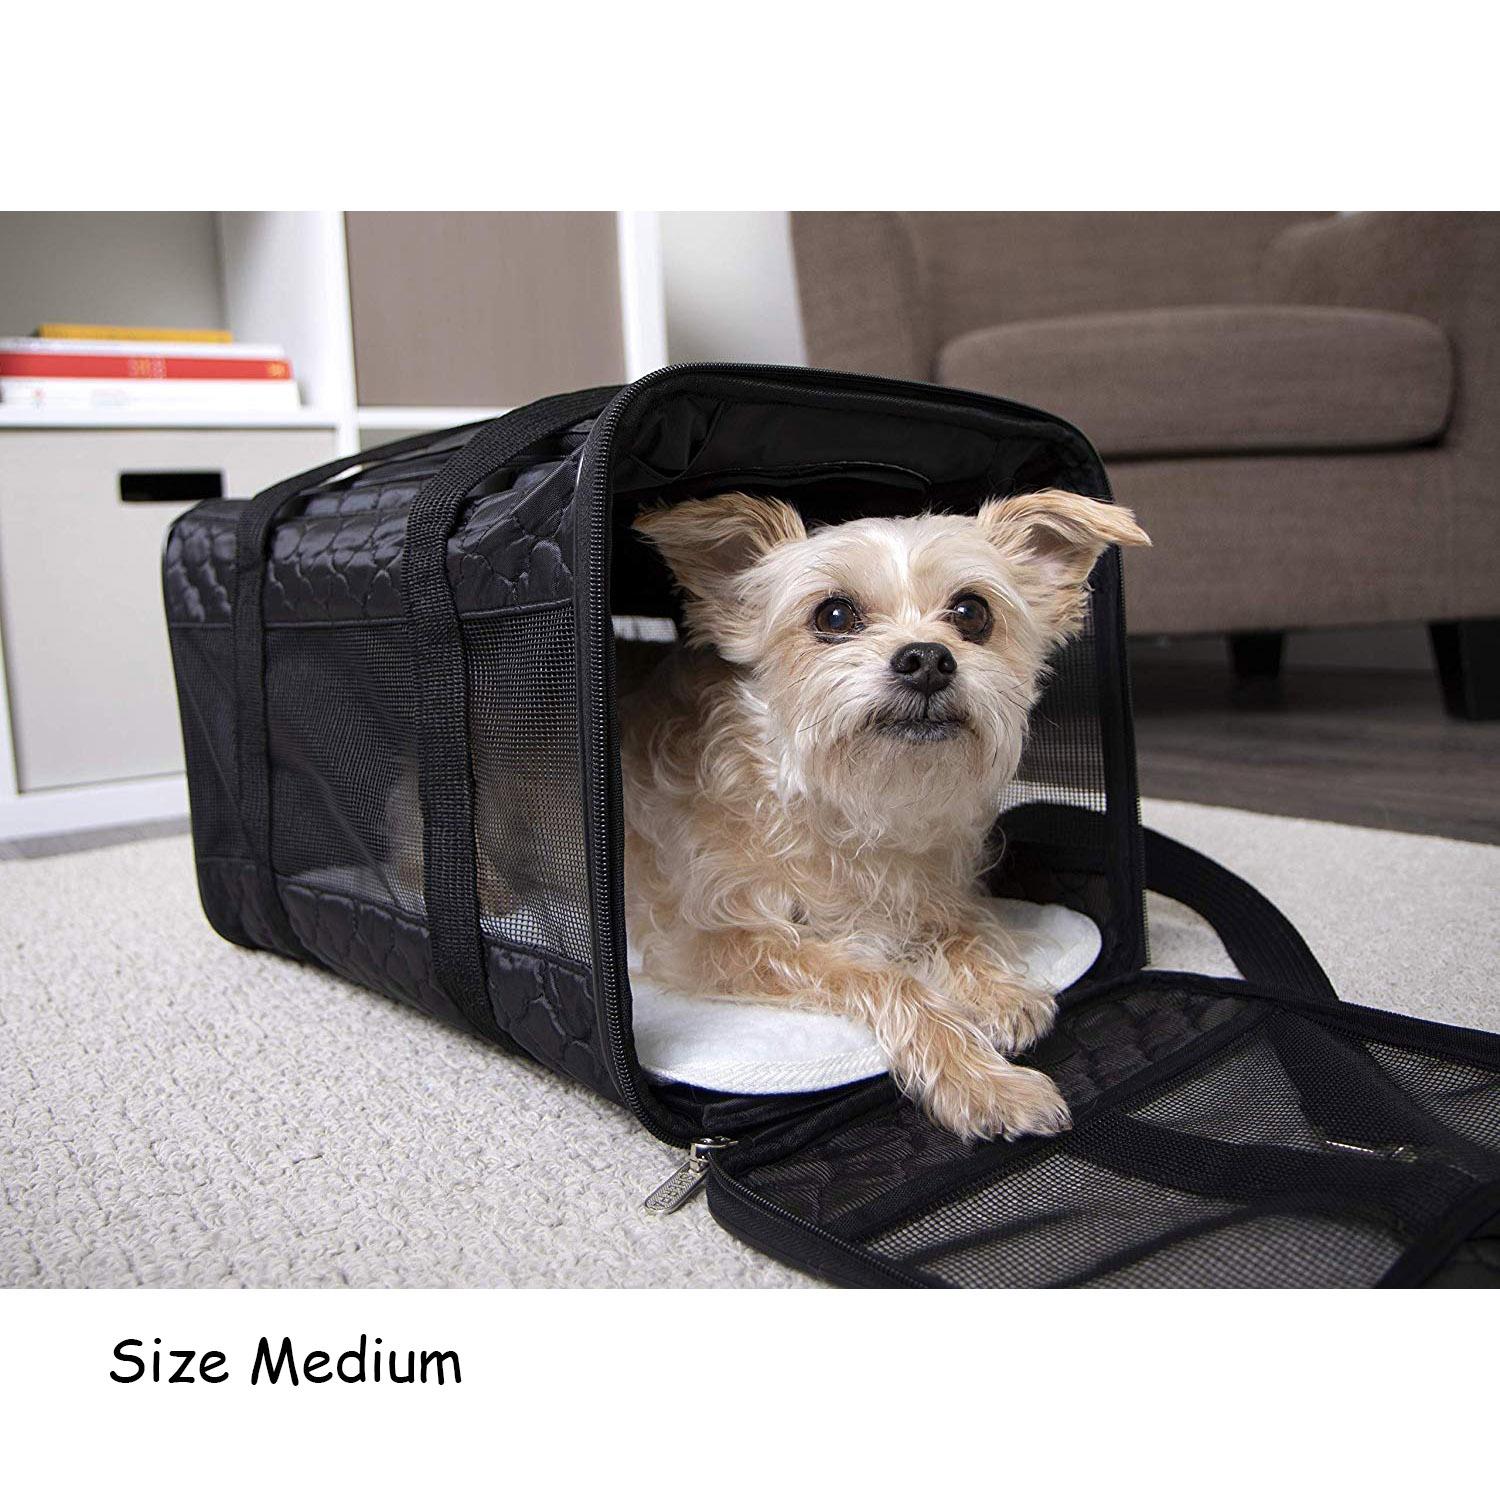 Sherpa Travel Original Deluxe Airline Approved Pet Carrier, Black, Large